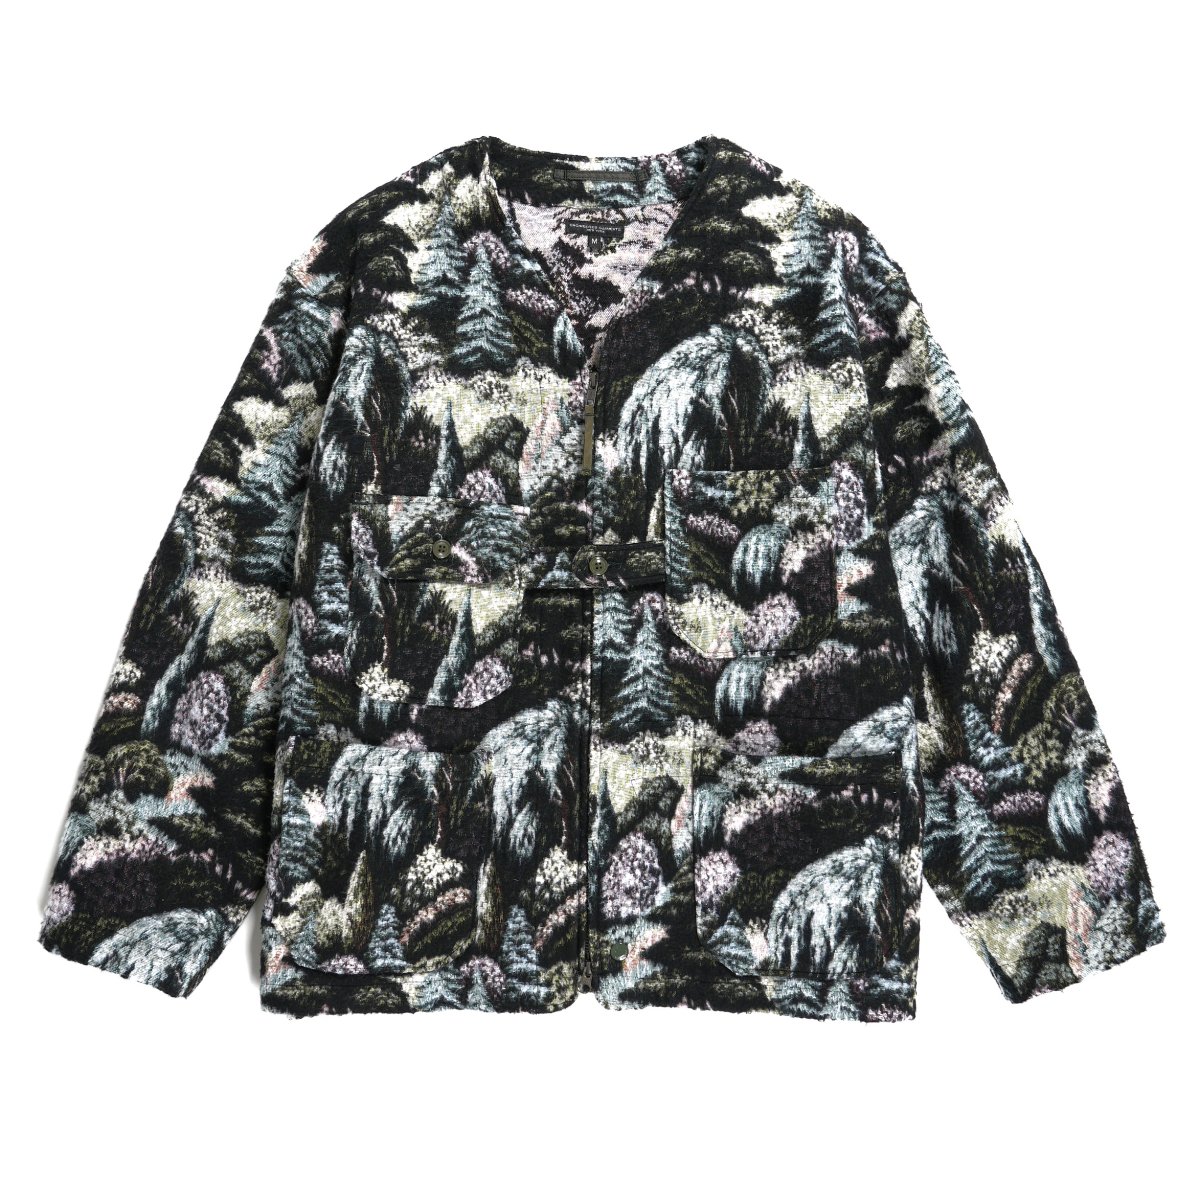 Engineered Garments <BR>Shooting Jacket - CP Forest Jacquard -

